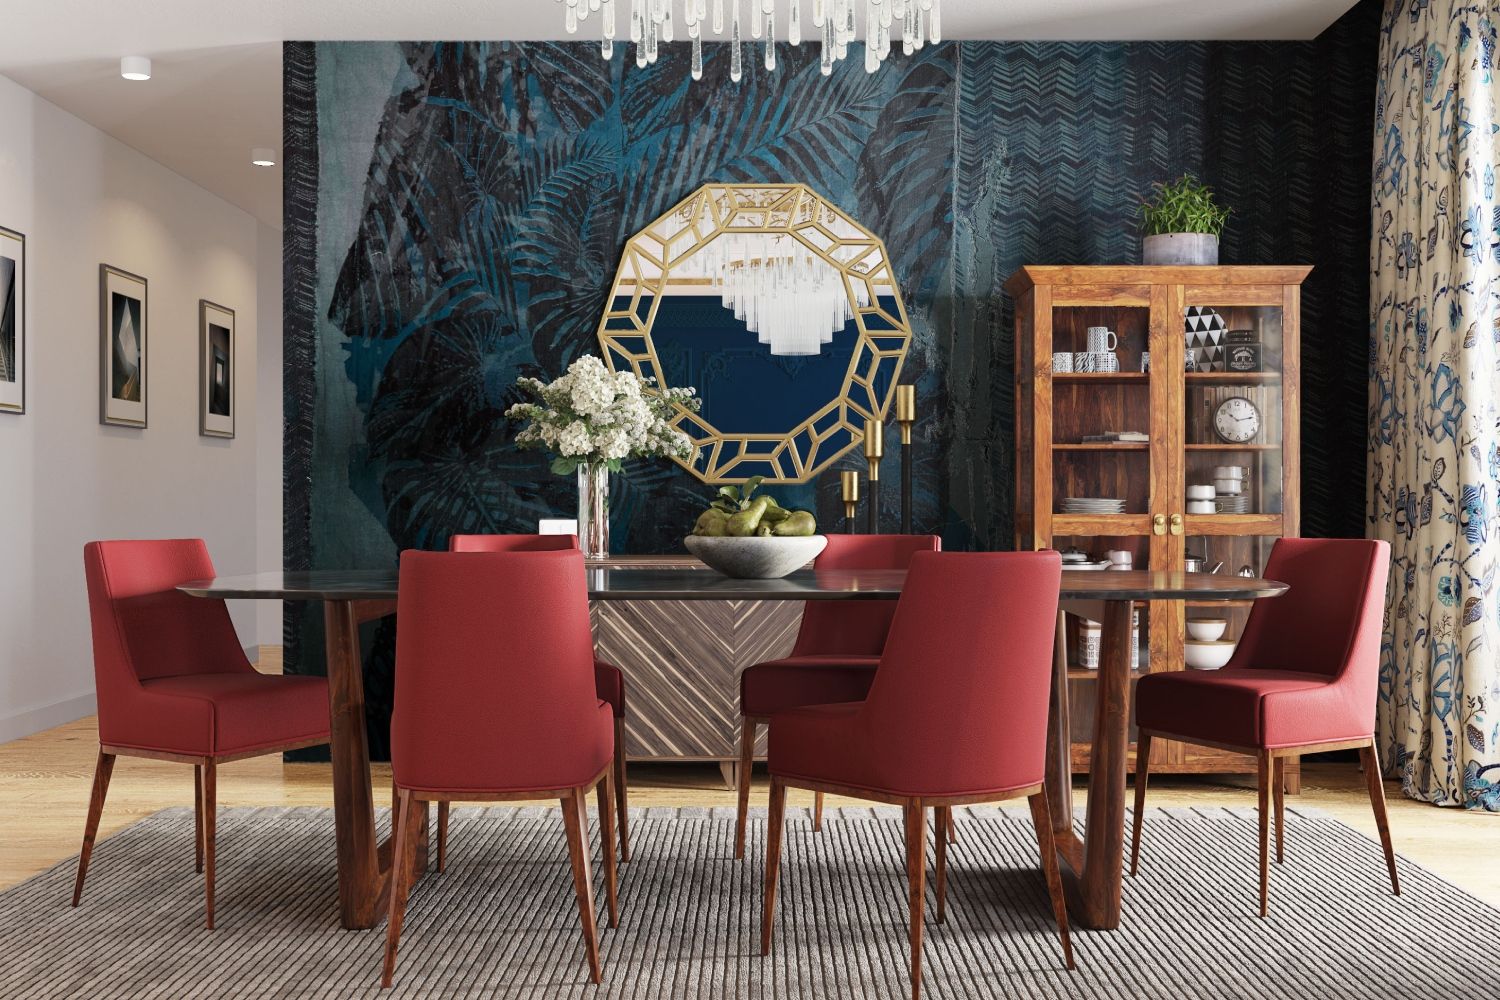 Eclectic Dark Blue And Black Tropical-Themed Wallpaper Design For Dining Rooms